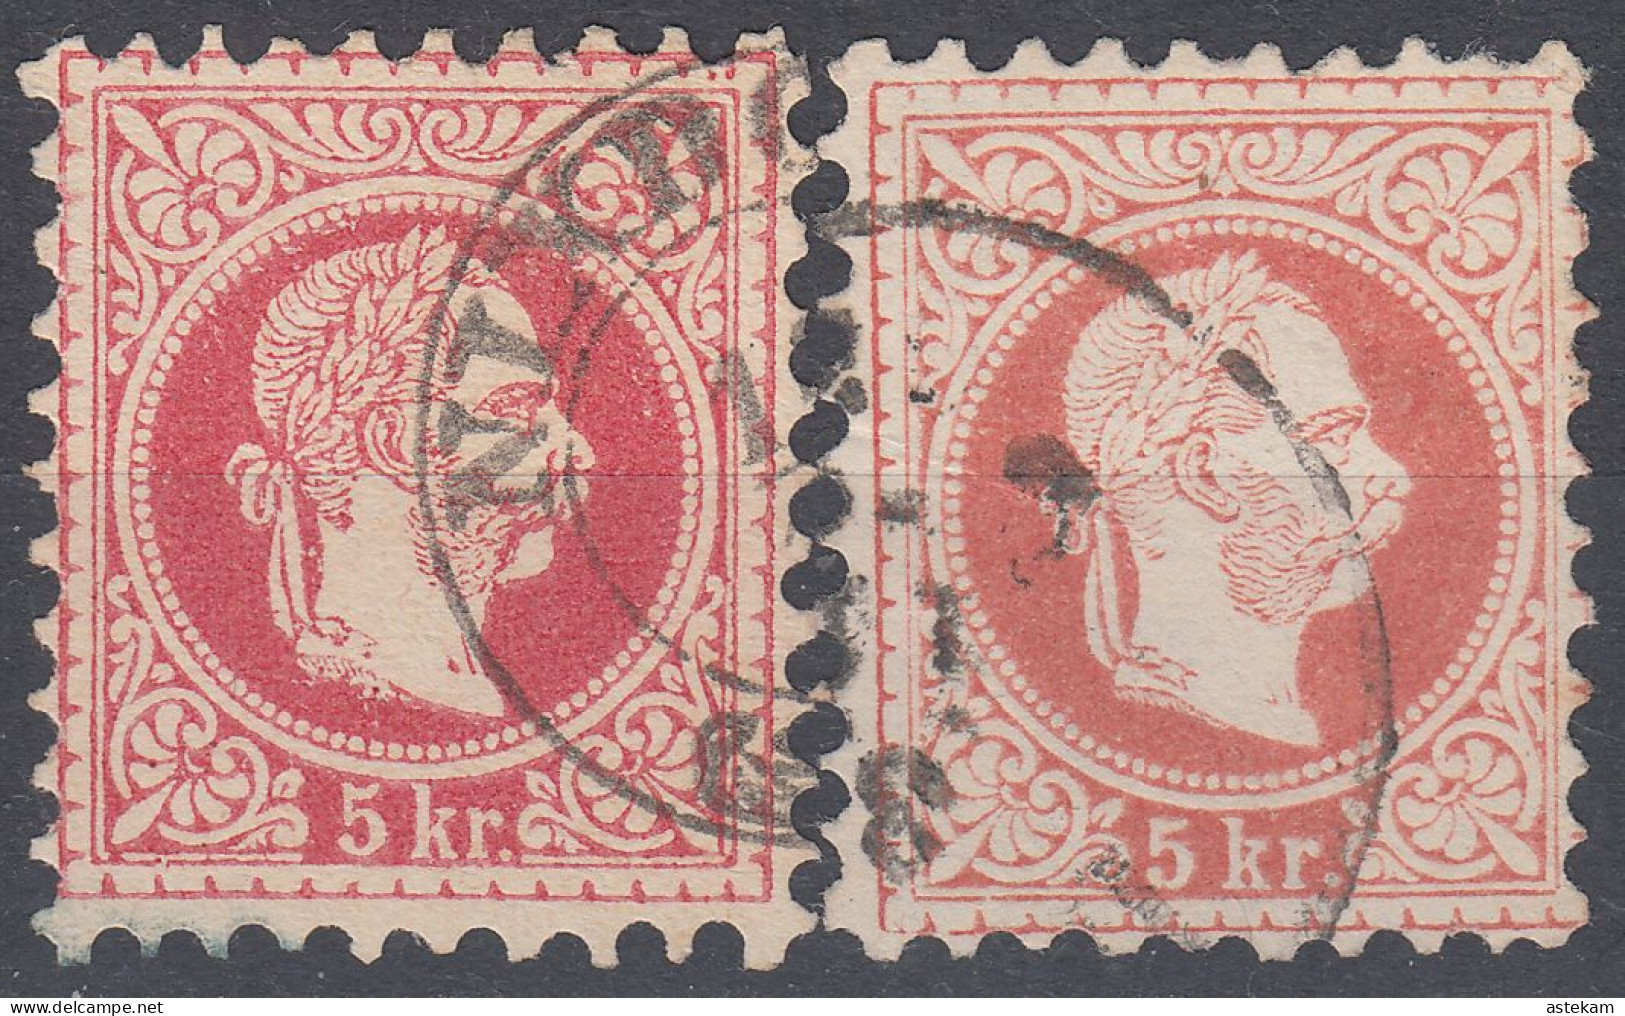 AUSTRIA 1867, KAISER FRANZ JOSEPH, MiNo 37, TWO USED STAMPS From 5.oo KROUZERS In ERROR With DIFFERENT COLORS - Usados